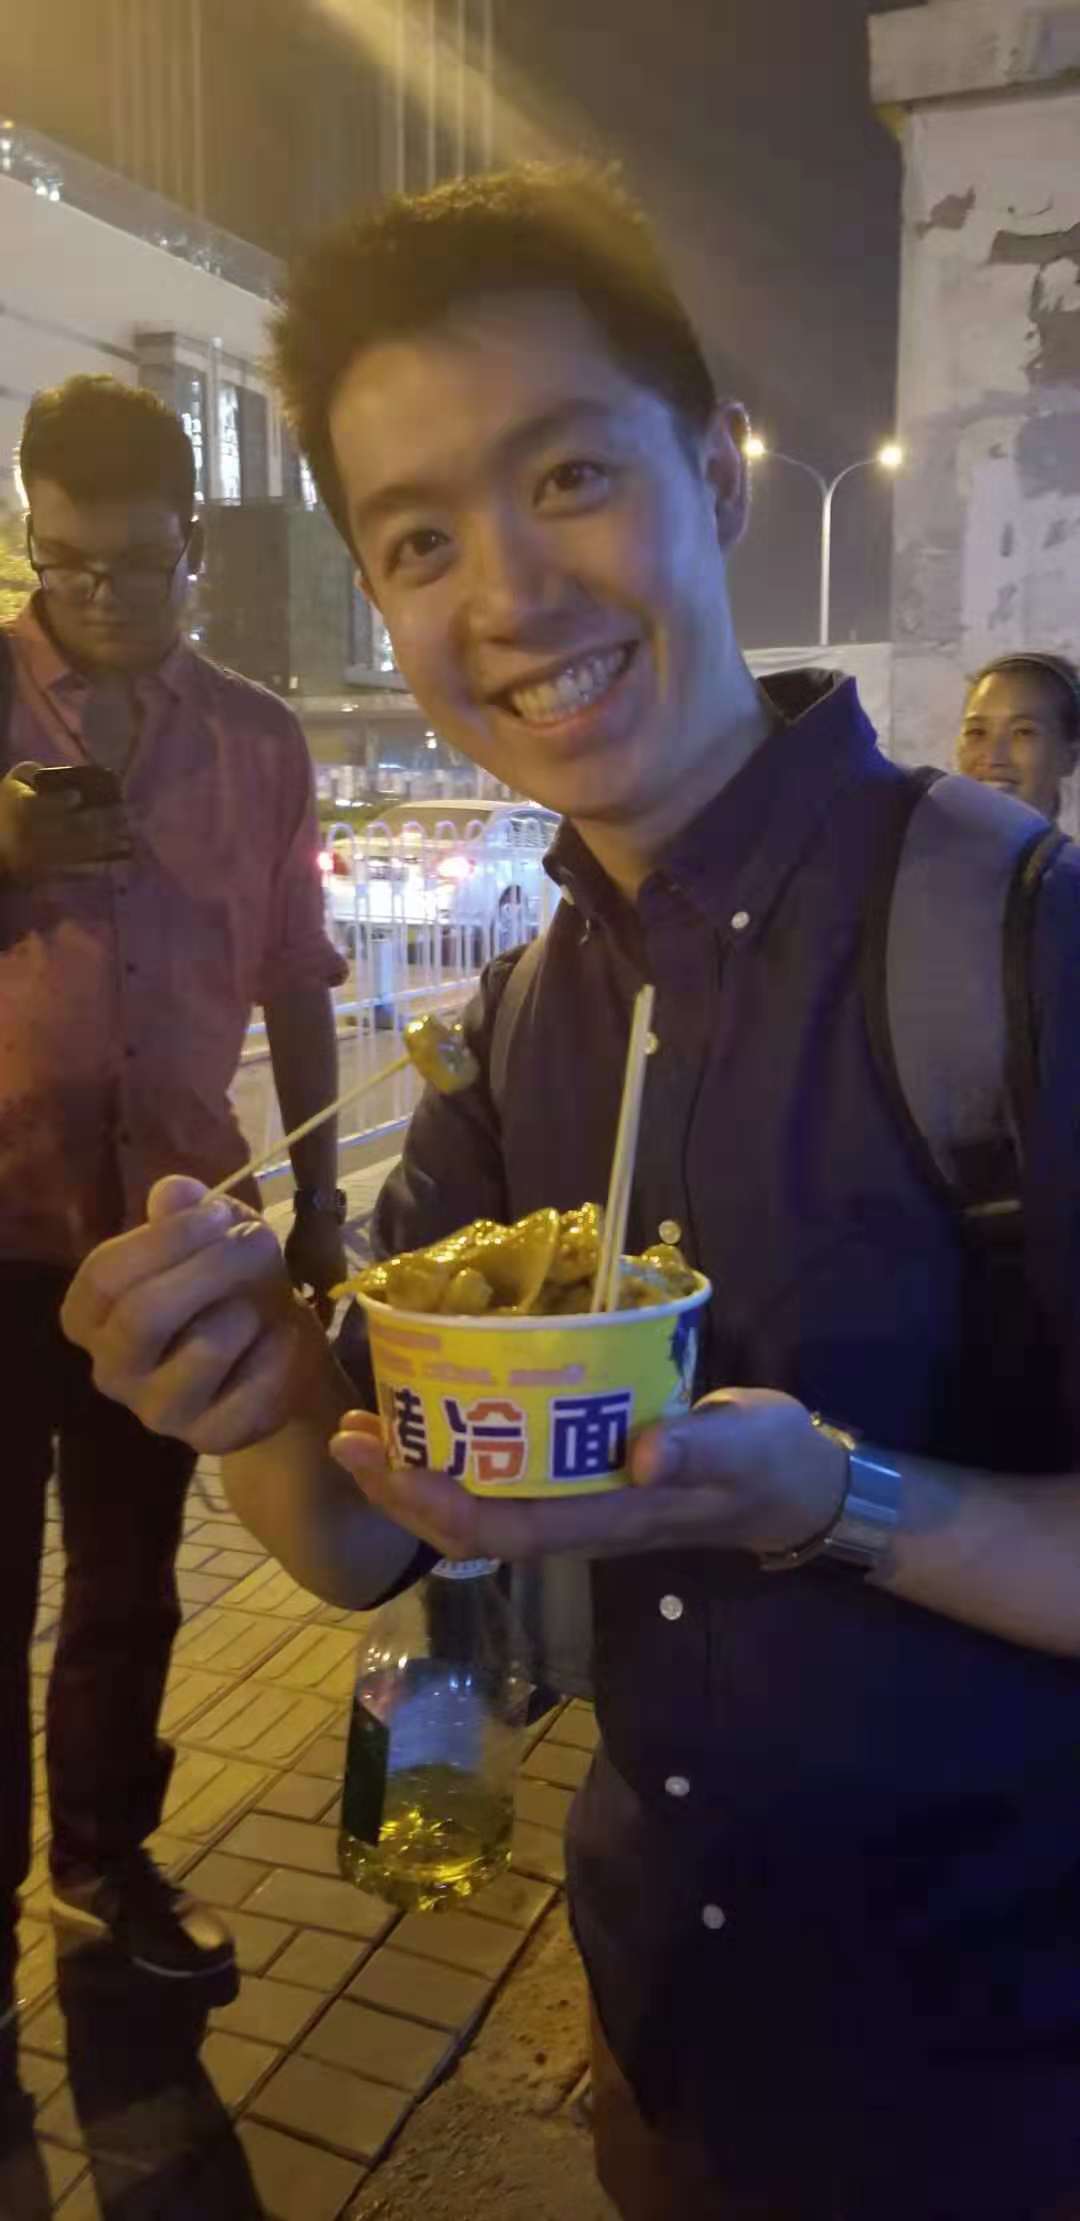 Lawrence, excited about his street food find